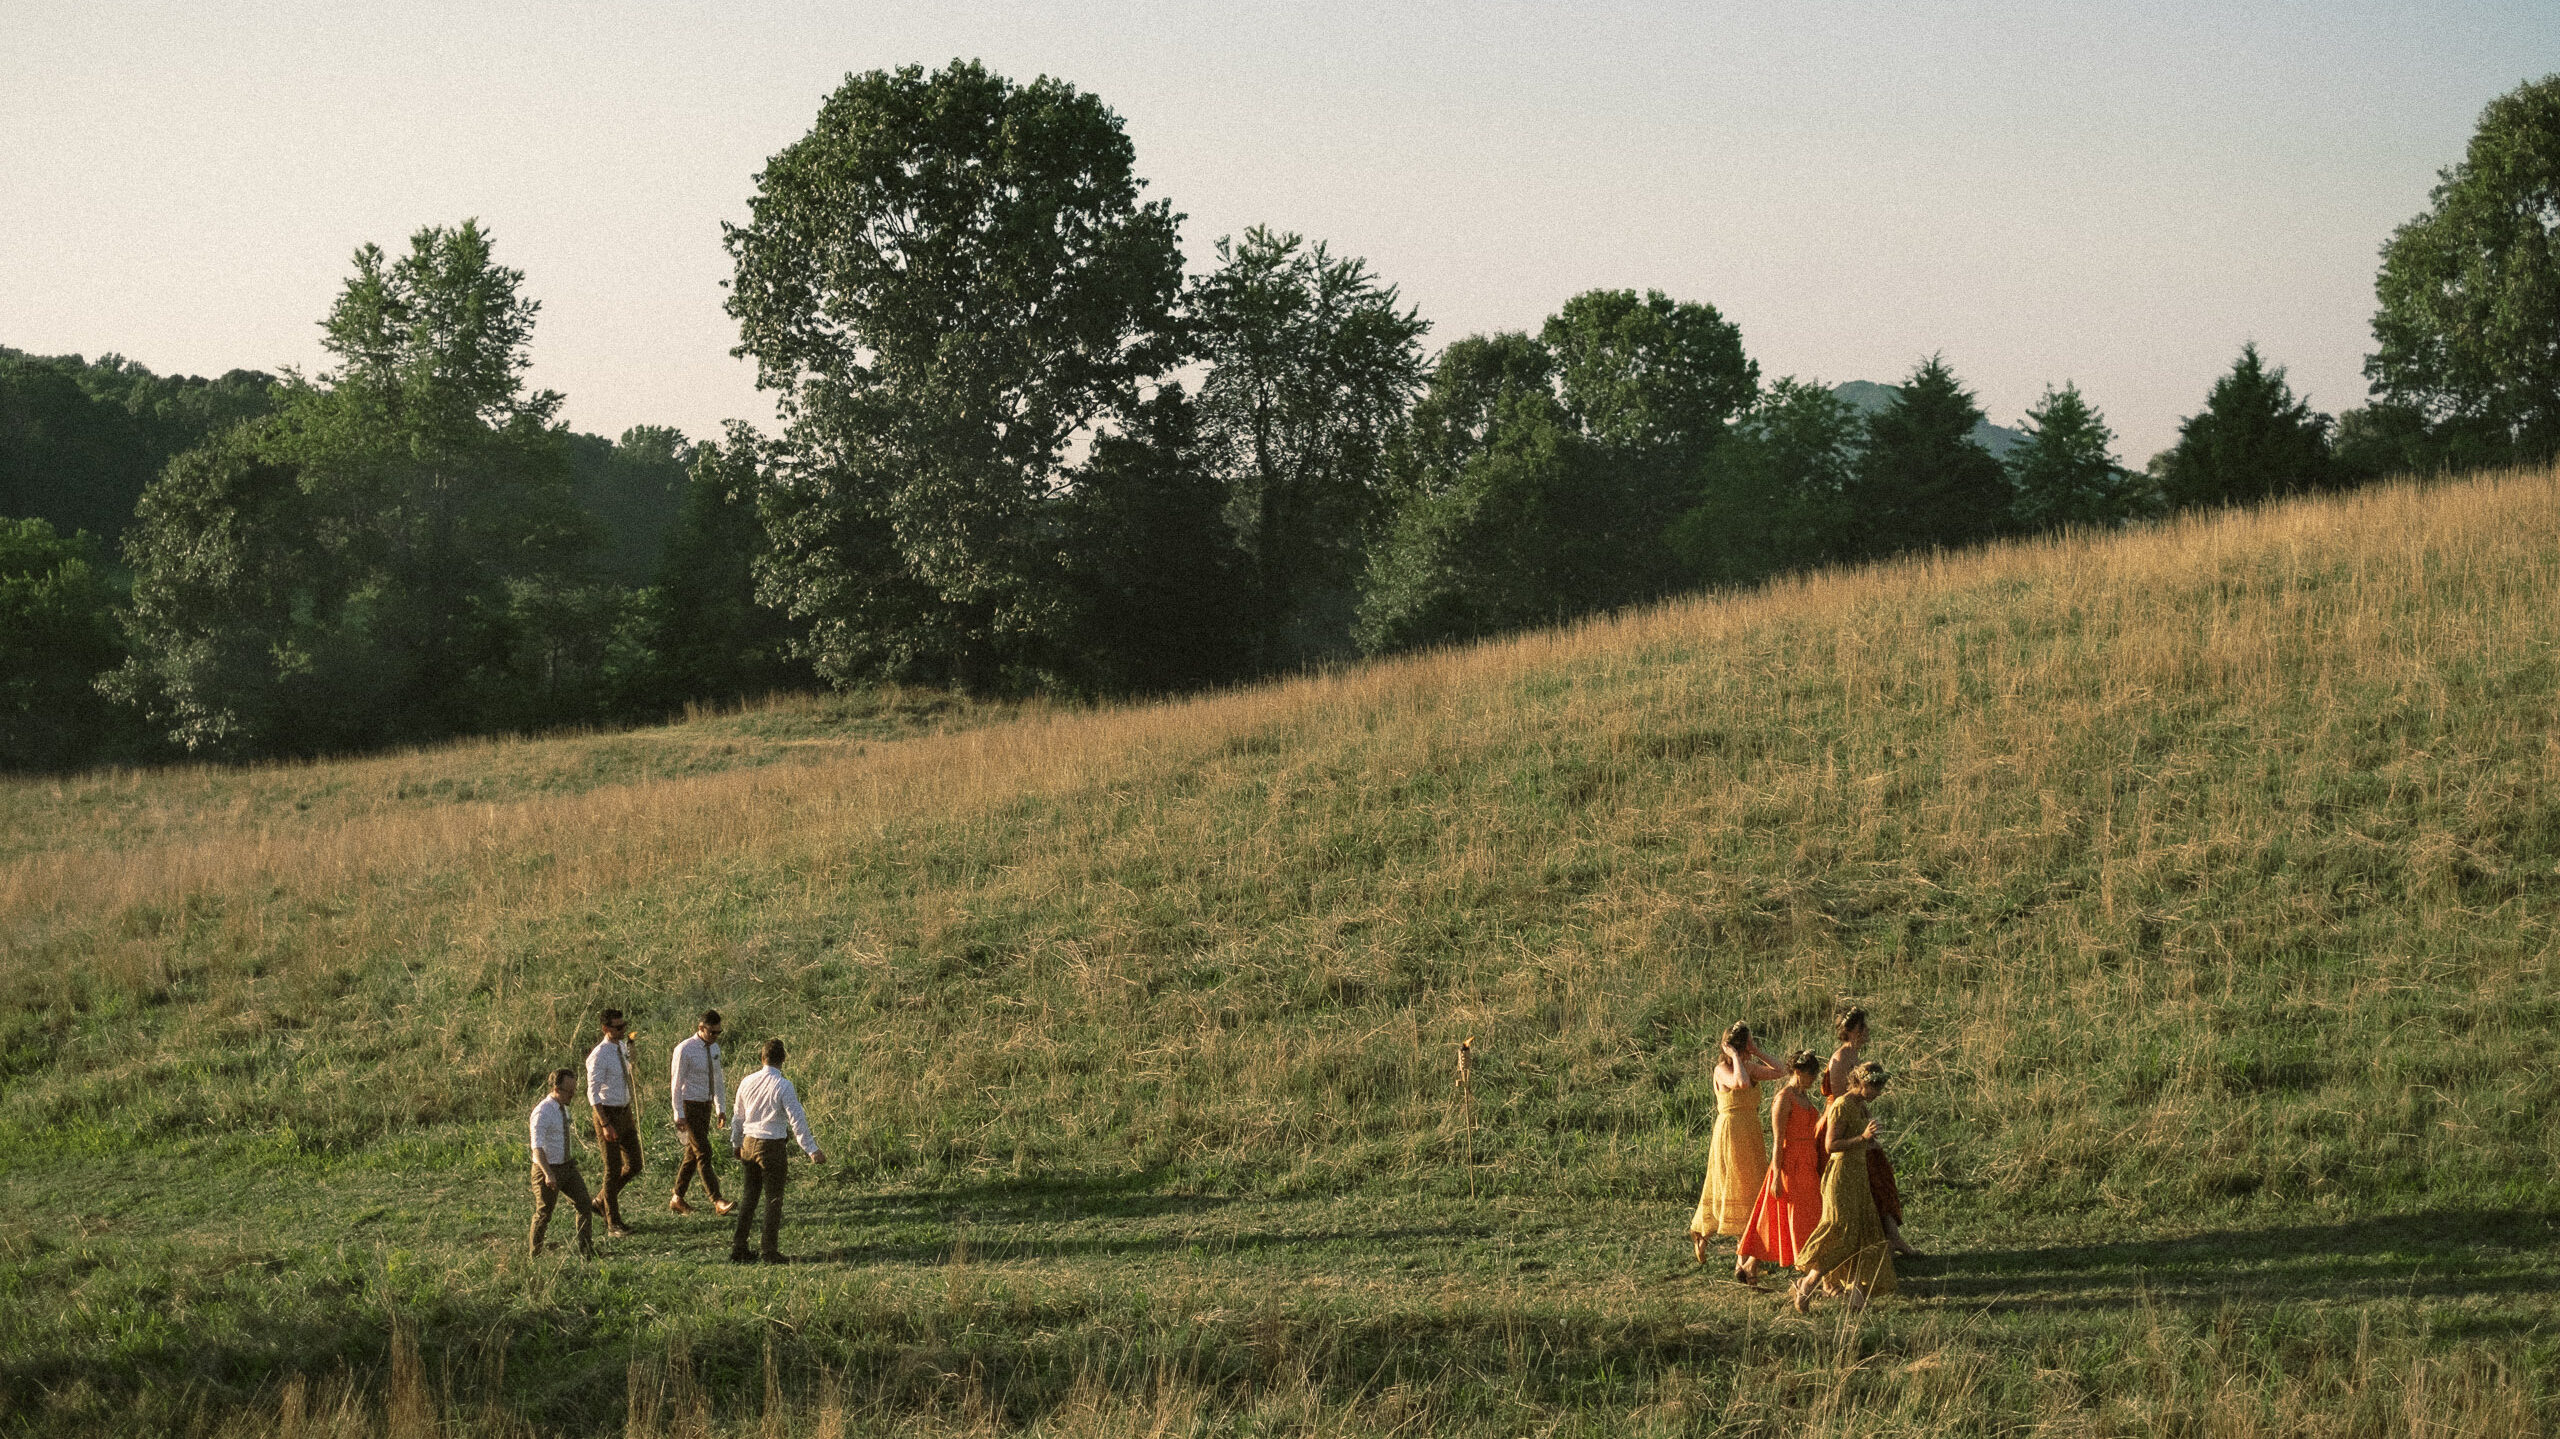 fly on the wall style documentary photography - wedding party walking in field at Virginia backyard wedding